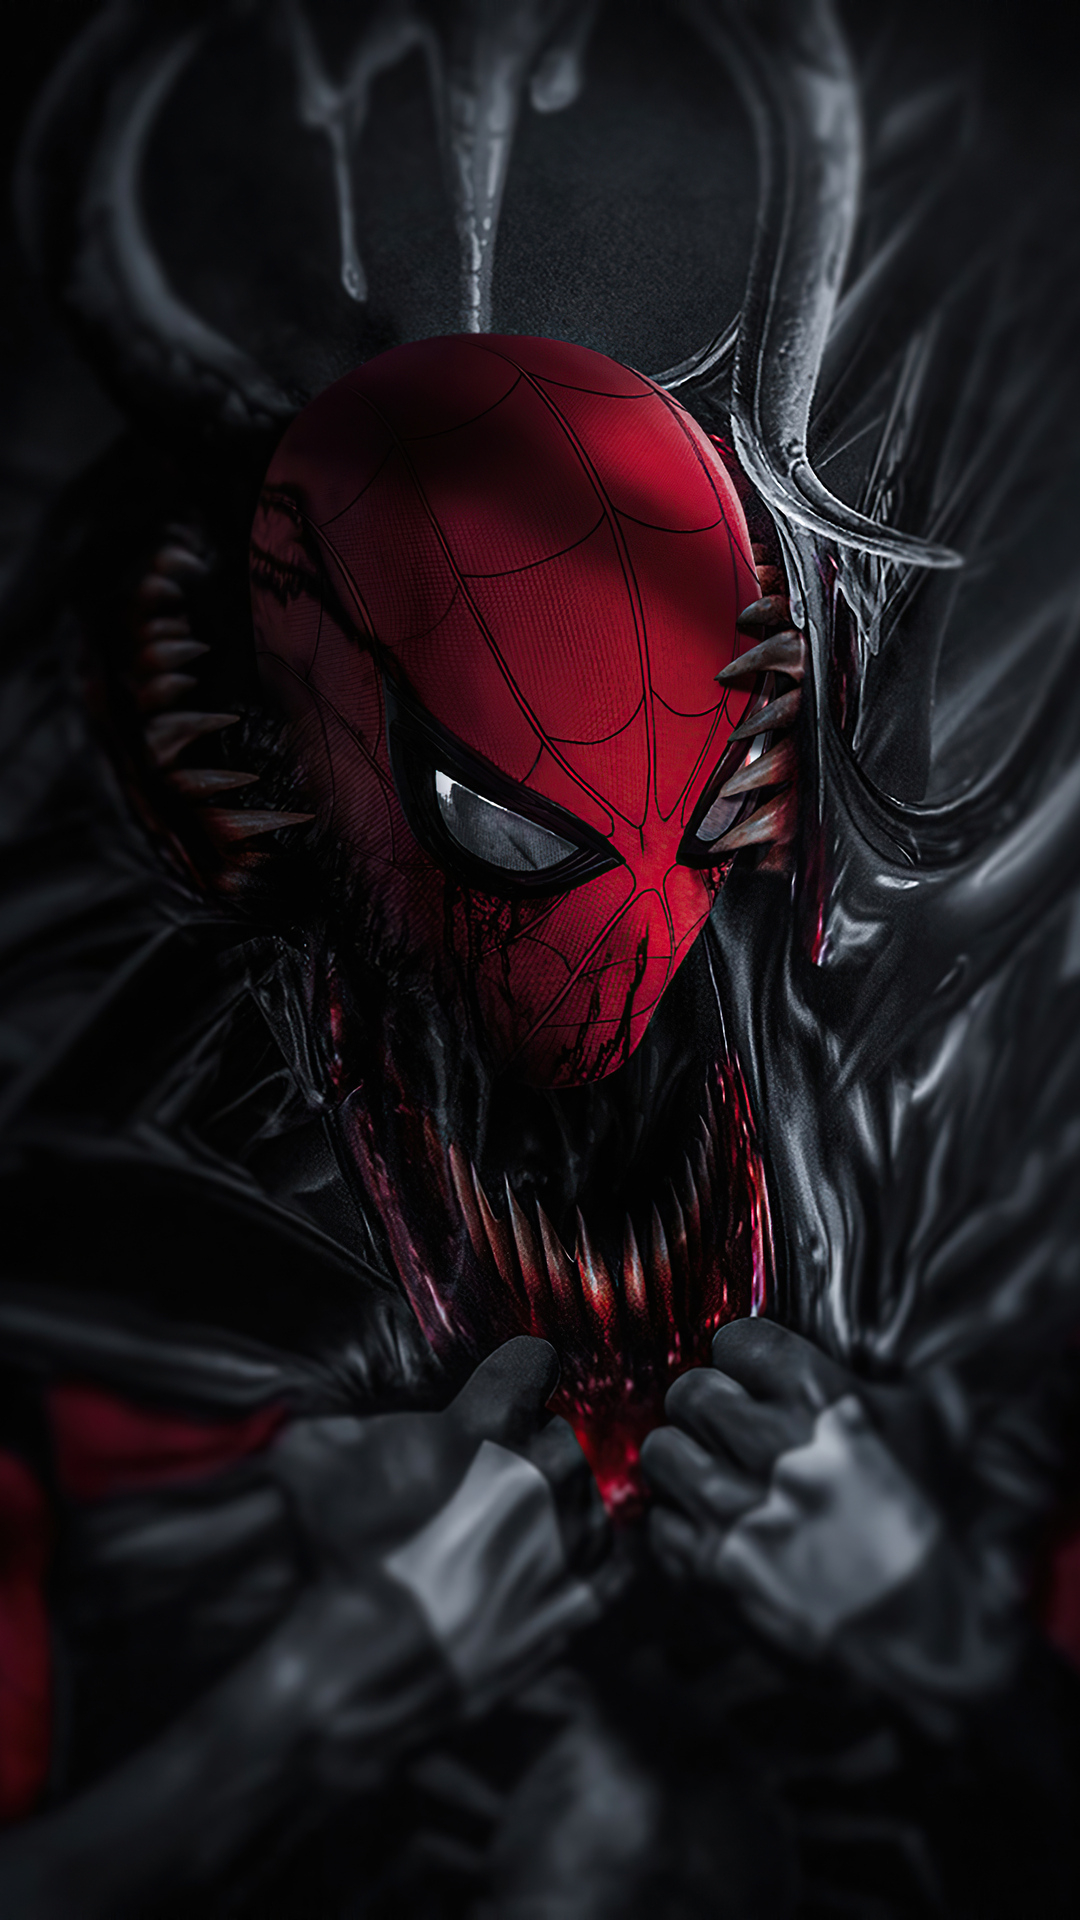 1080x1920 Venom Into Spiderman Iphone 7,6s,6 Plus, Pixel xl ,One Plus 3,3t,5 HD 4k Wallpapers, Images, Backgrounds, Photos and Pictures